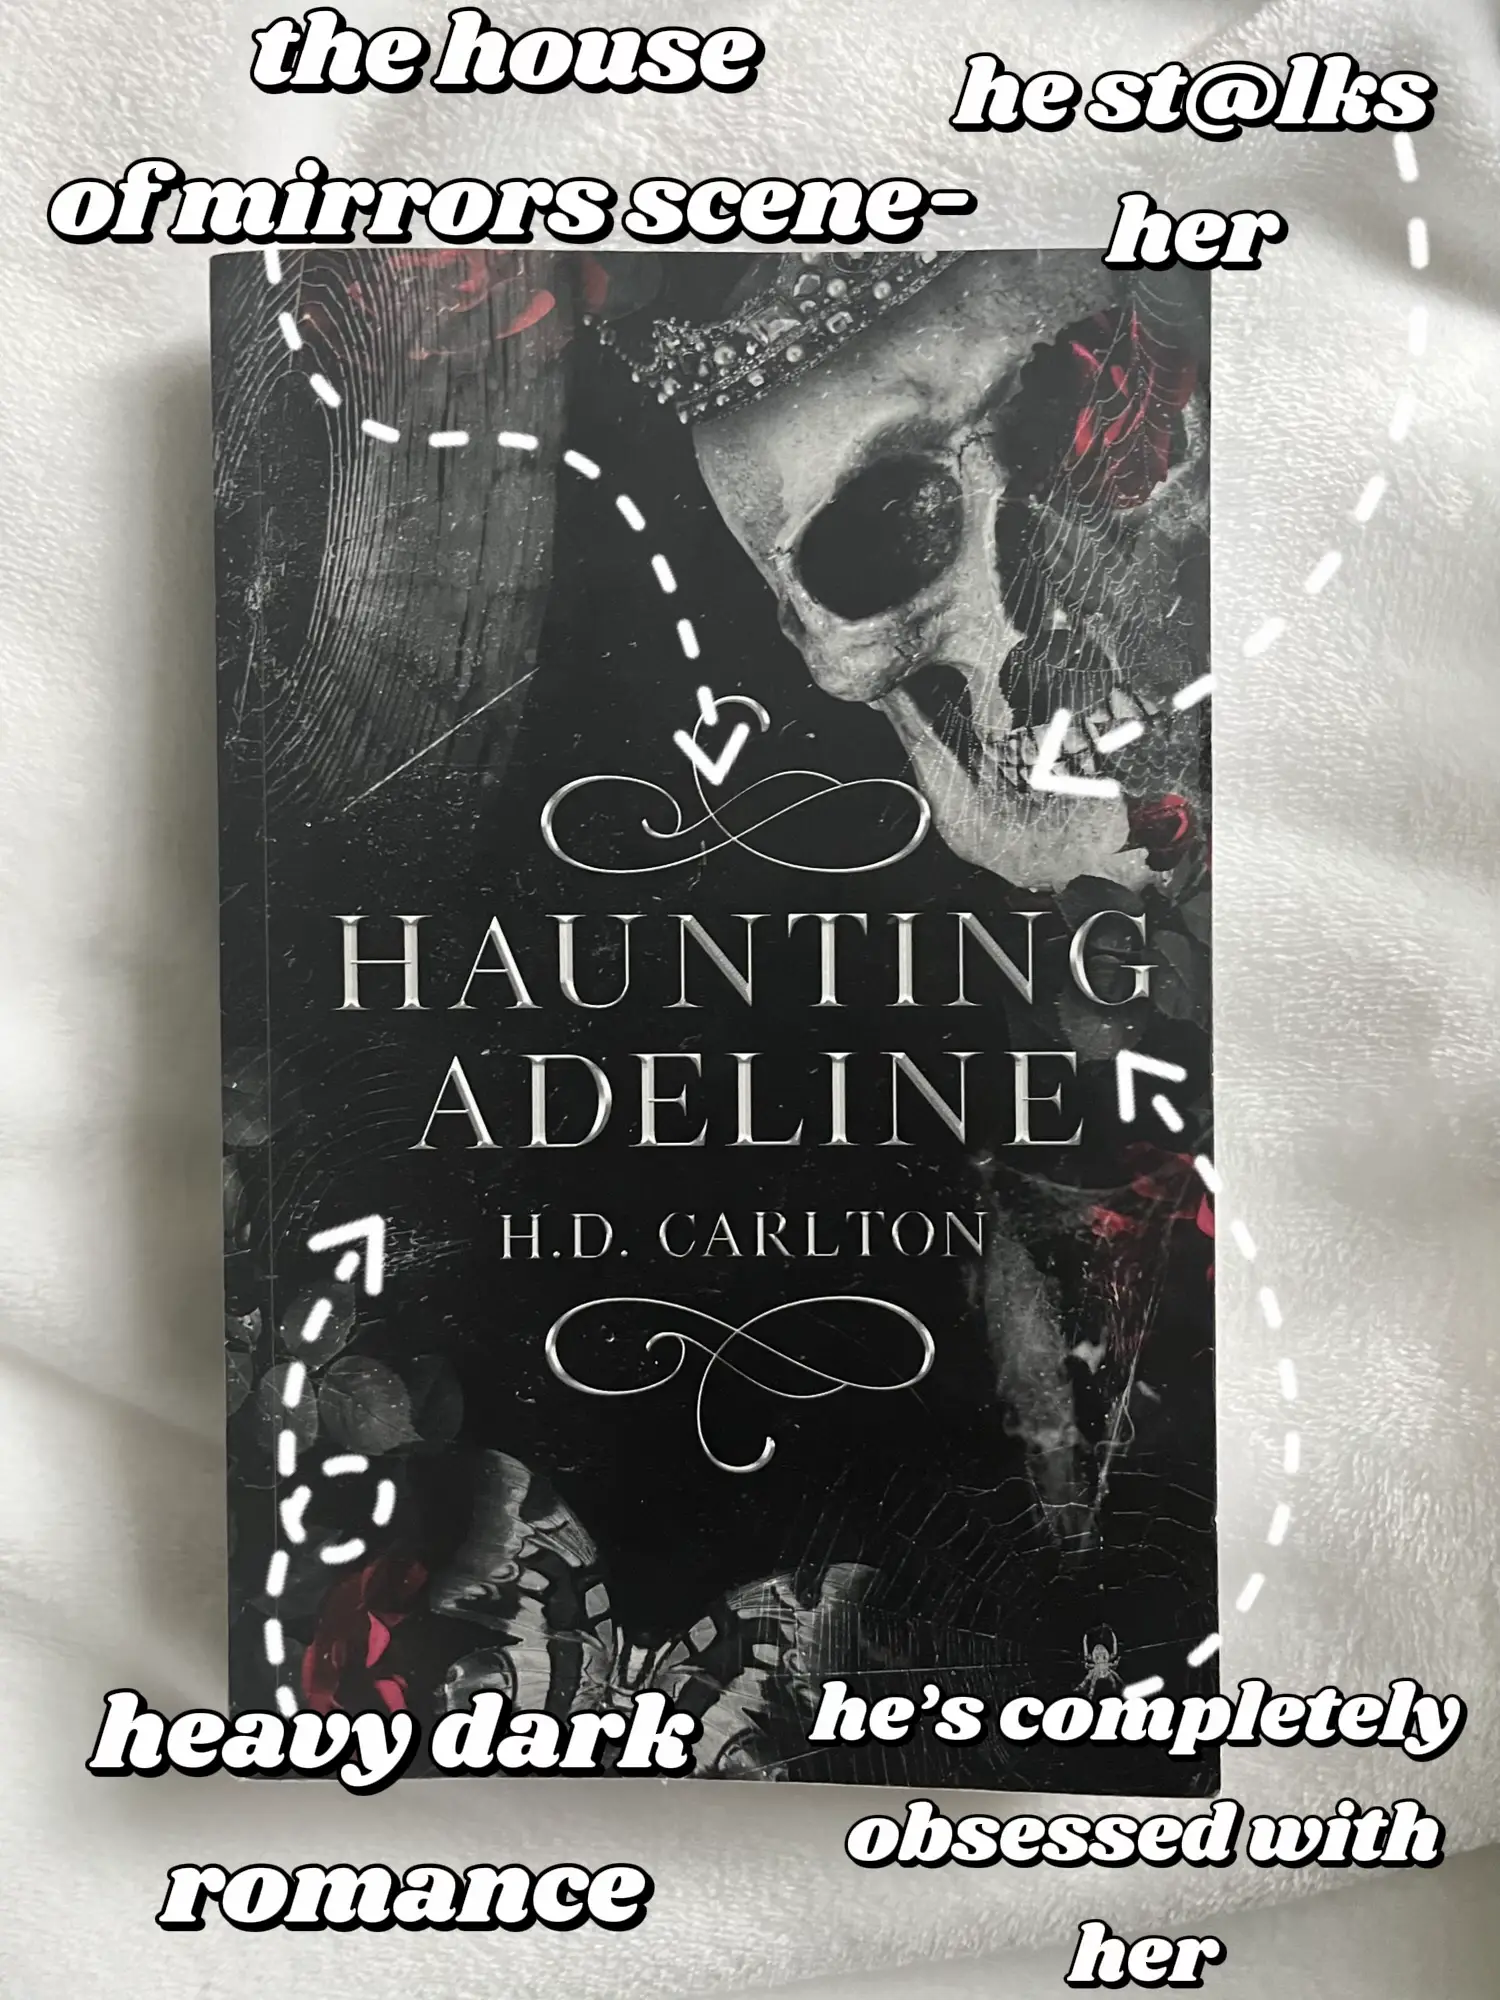  A book cover with a skeleton on it.